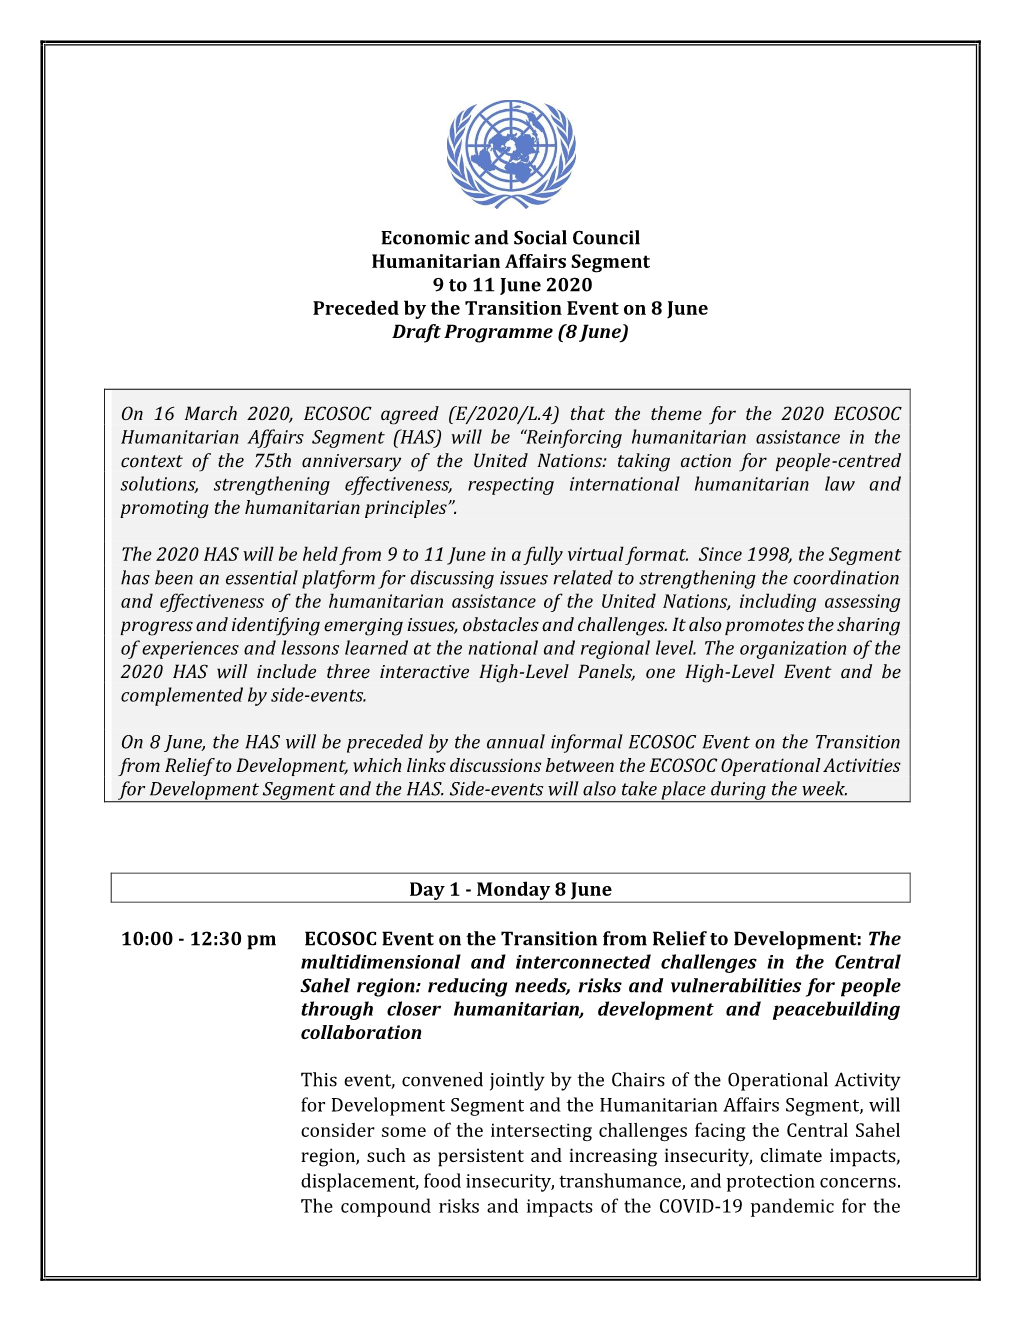 Economic and Social Council Humanitarian Affairs Segment 9 to 11 June 2020 Preceded by the Transition Event on 8 June Draft Programme (8 June)